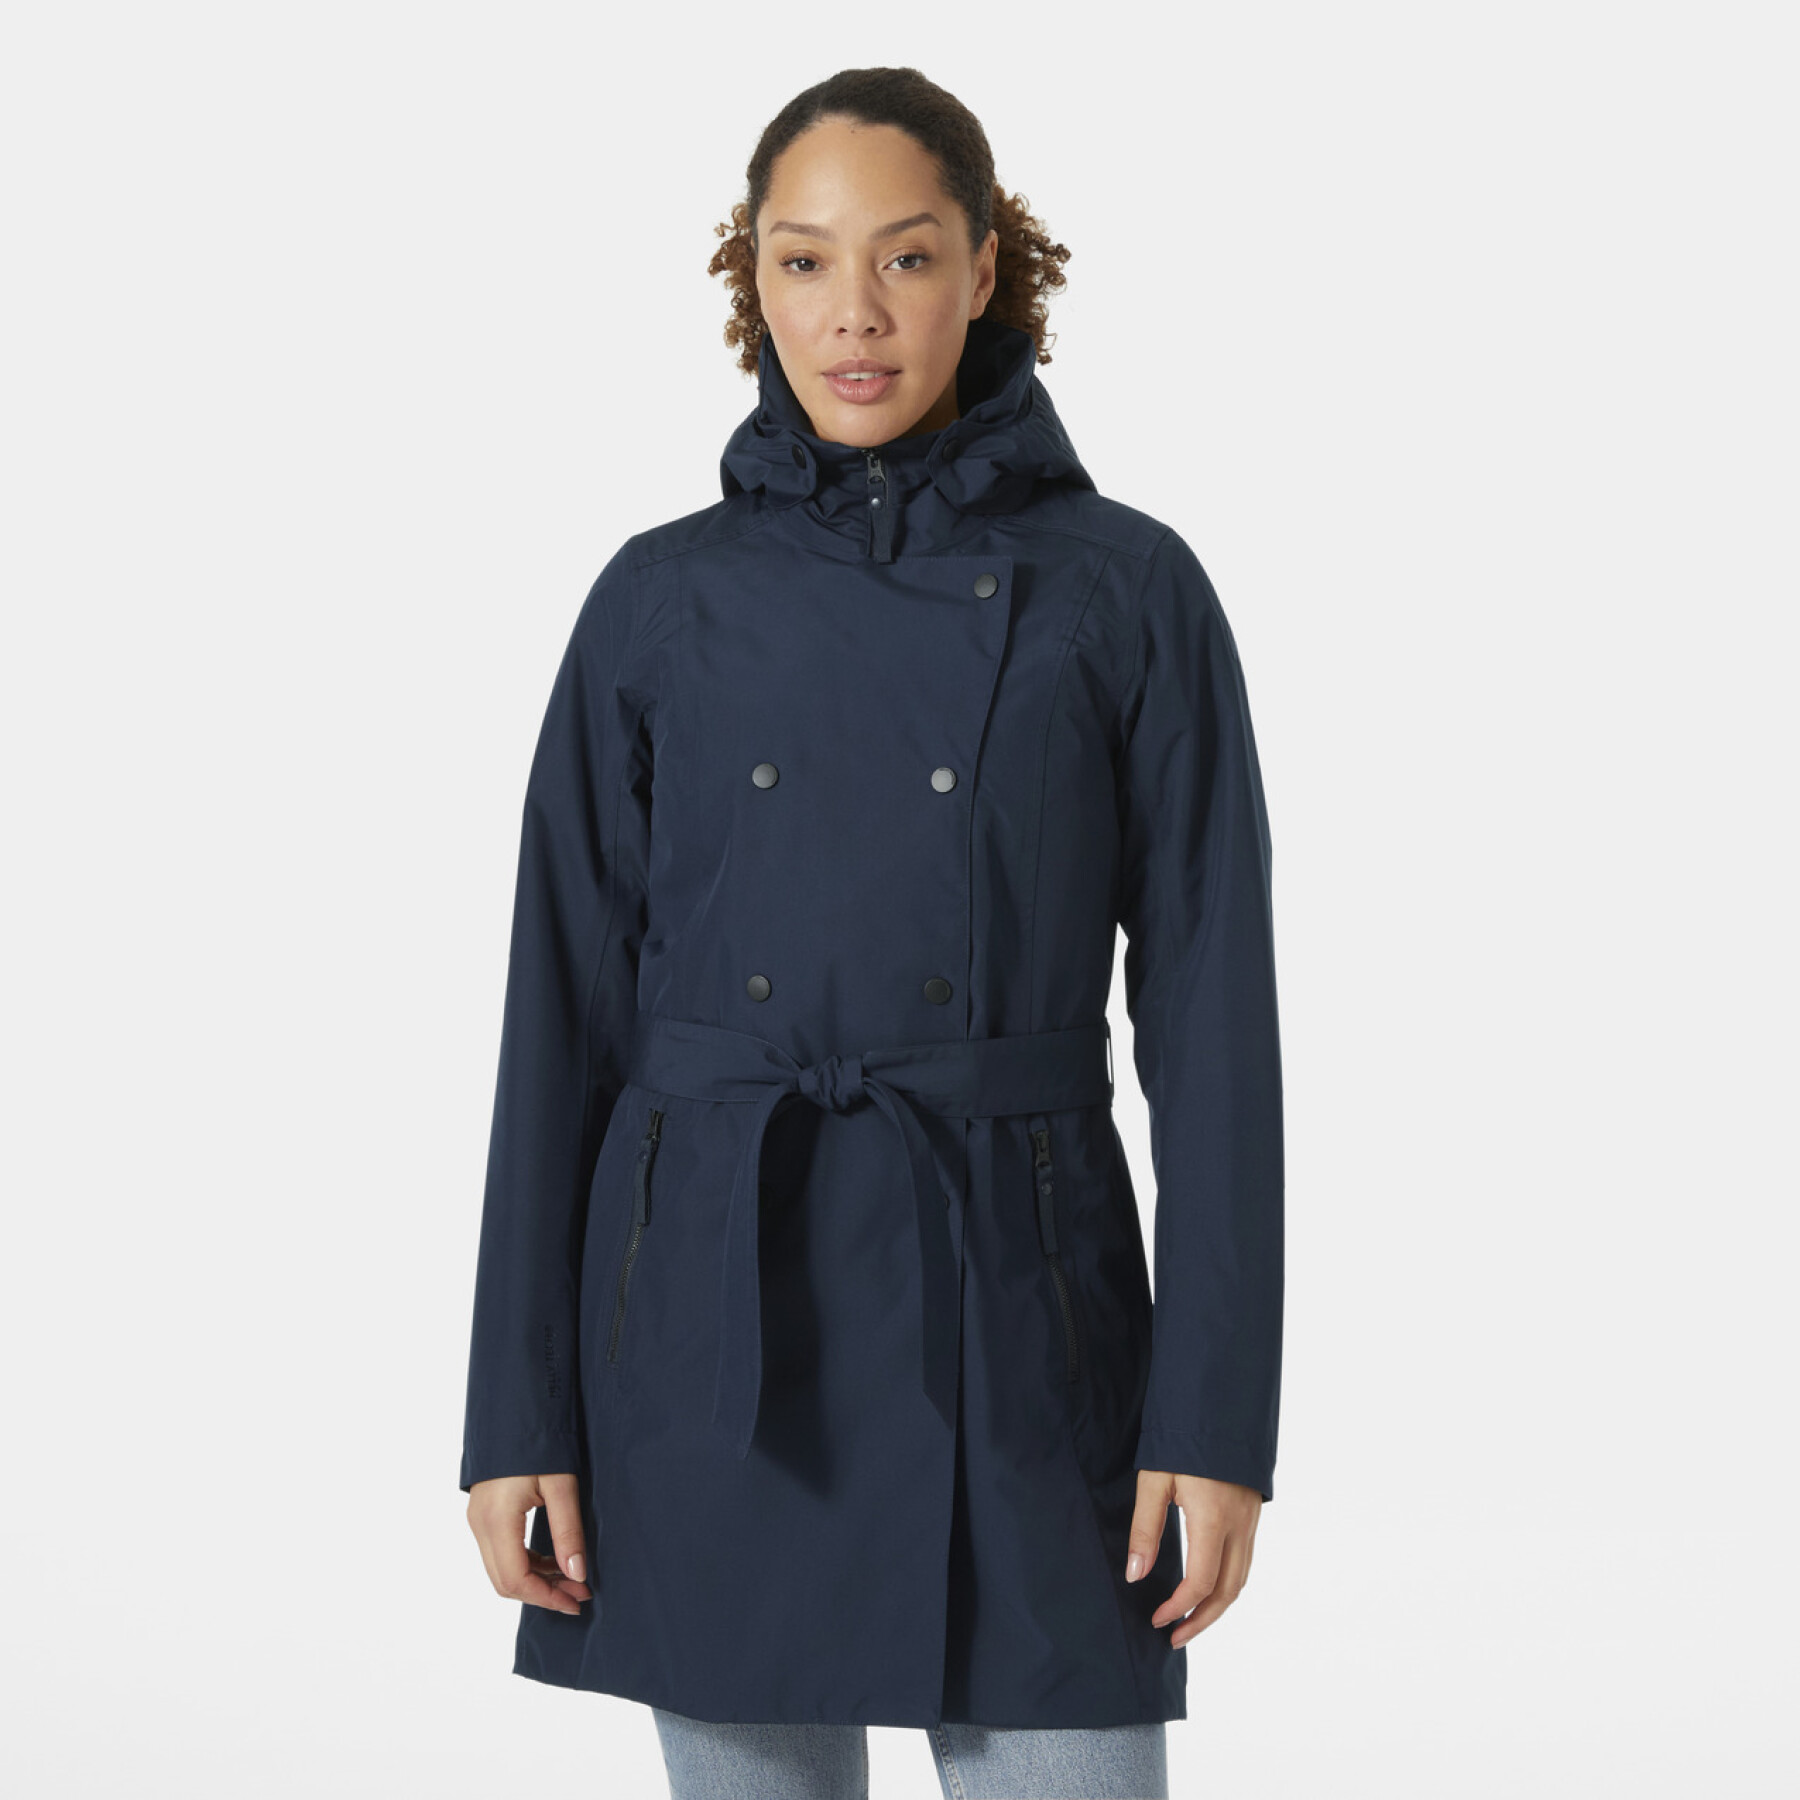 Cappotto da donna Helly Hansen welsey II trench insulated